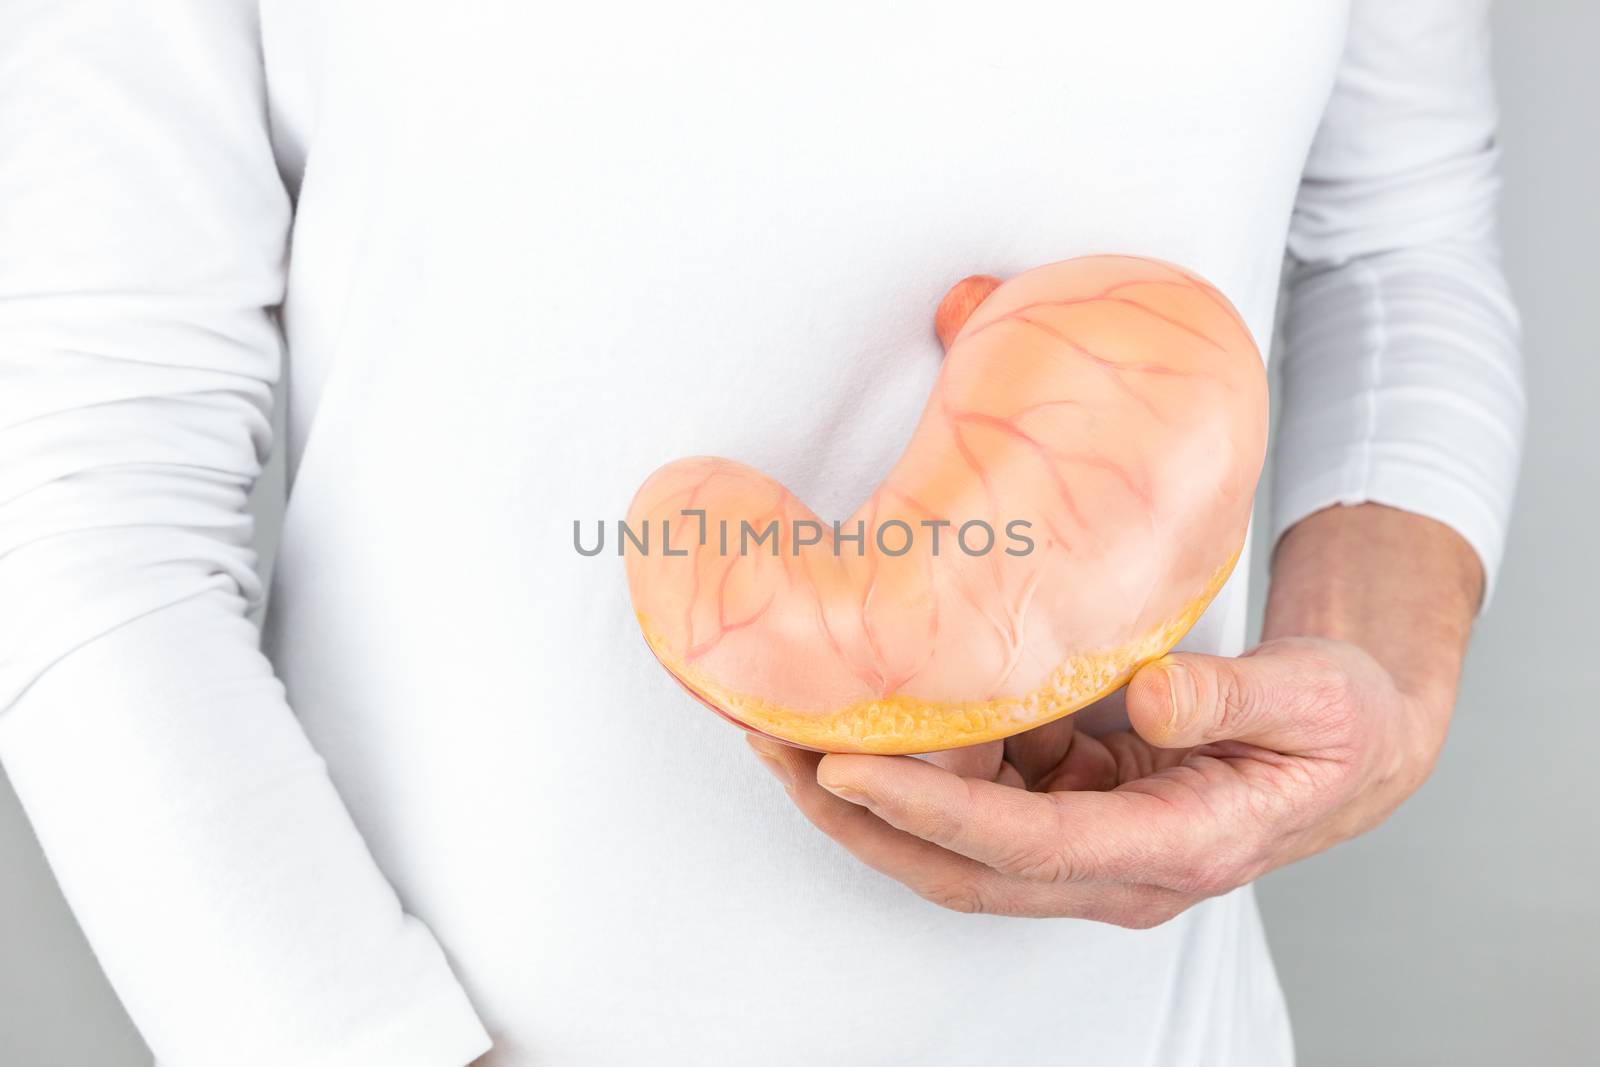 Female hand holding artificial model of human stomach by BenSchonewille